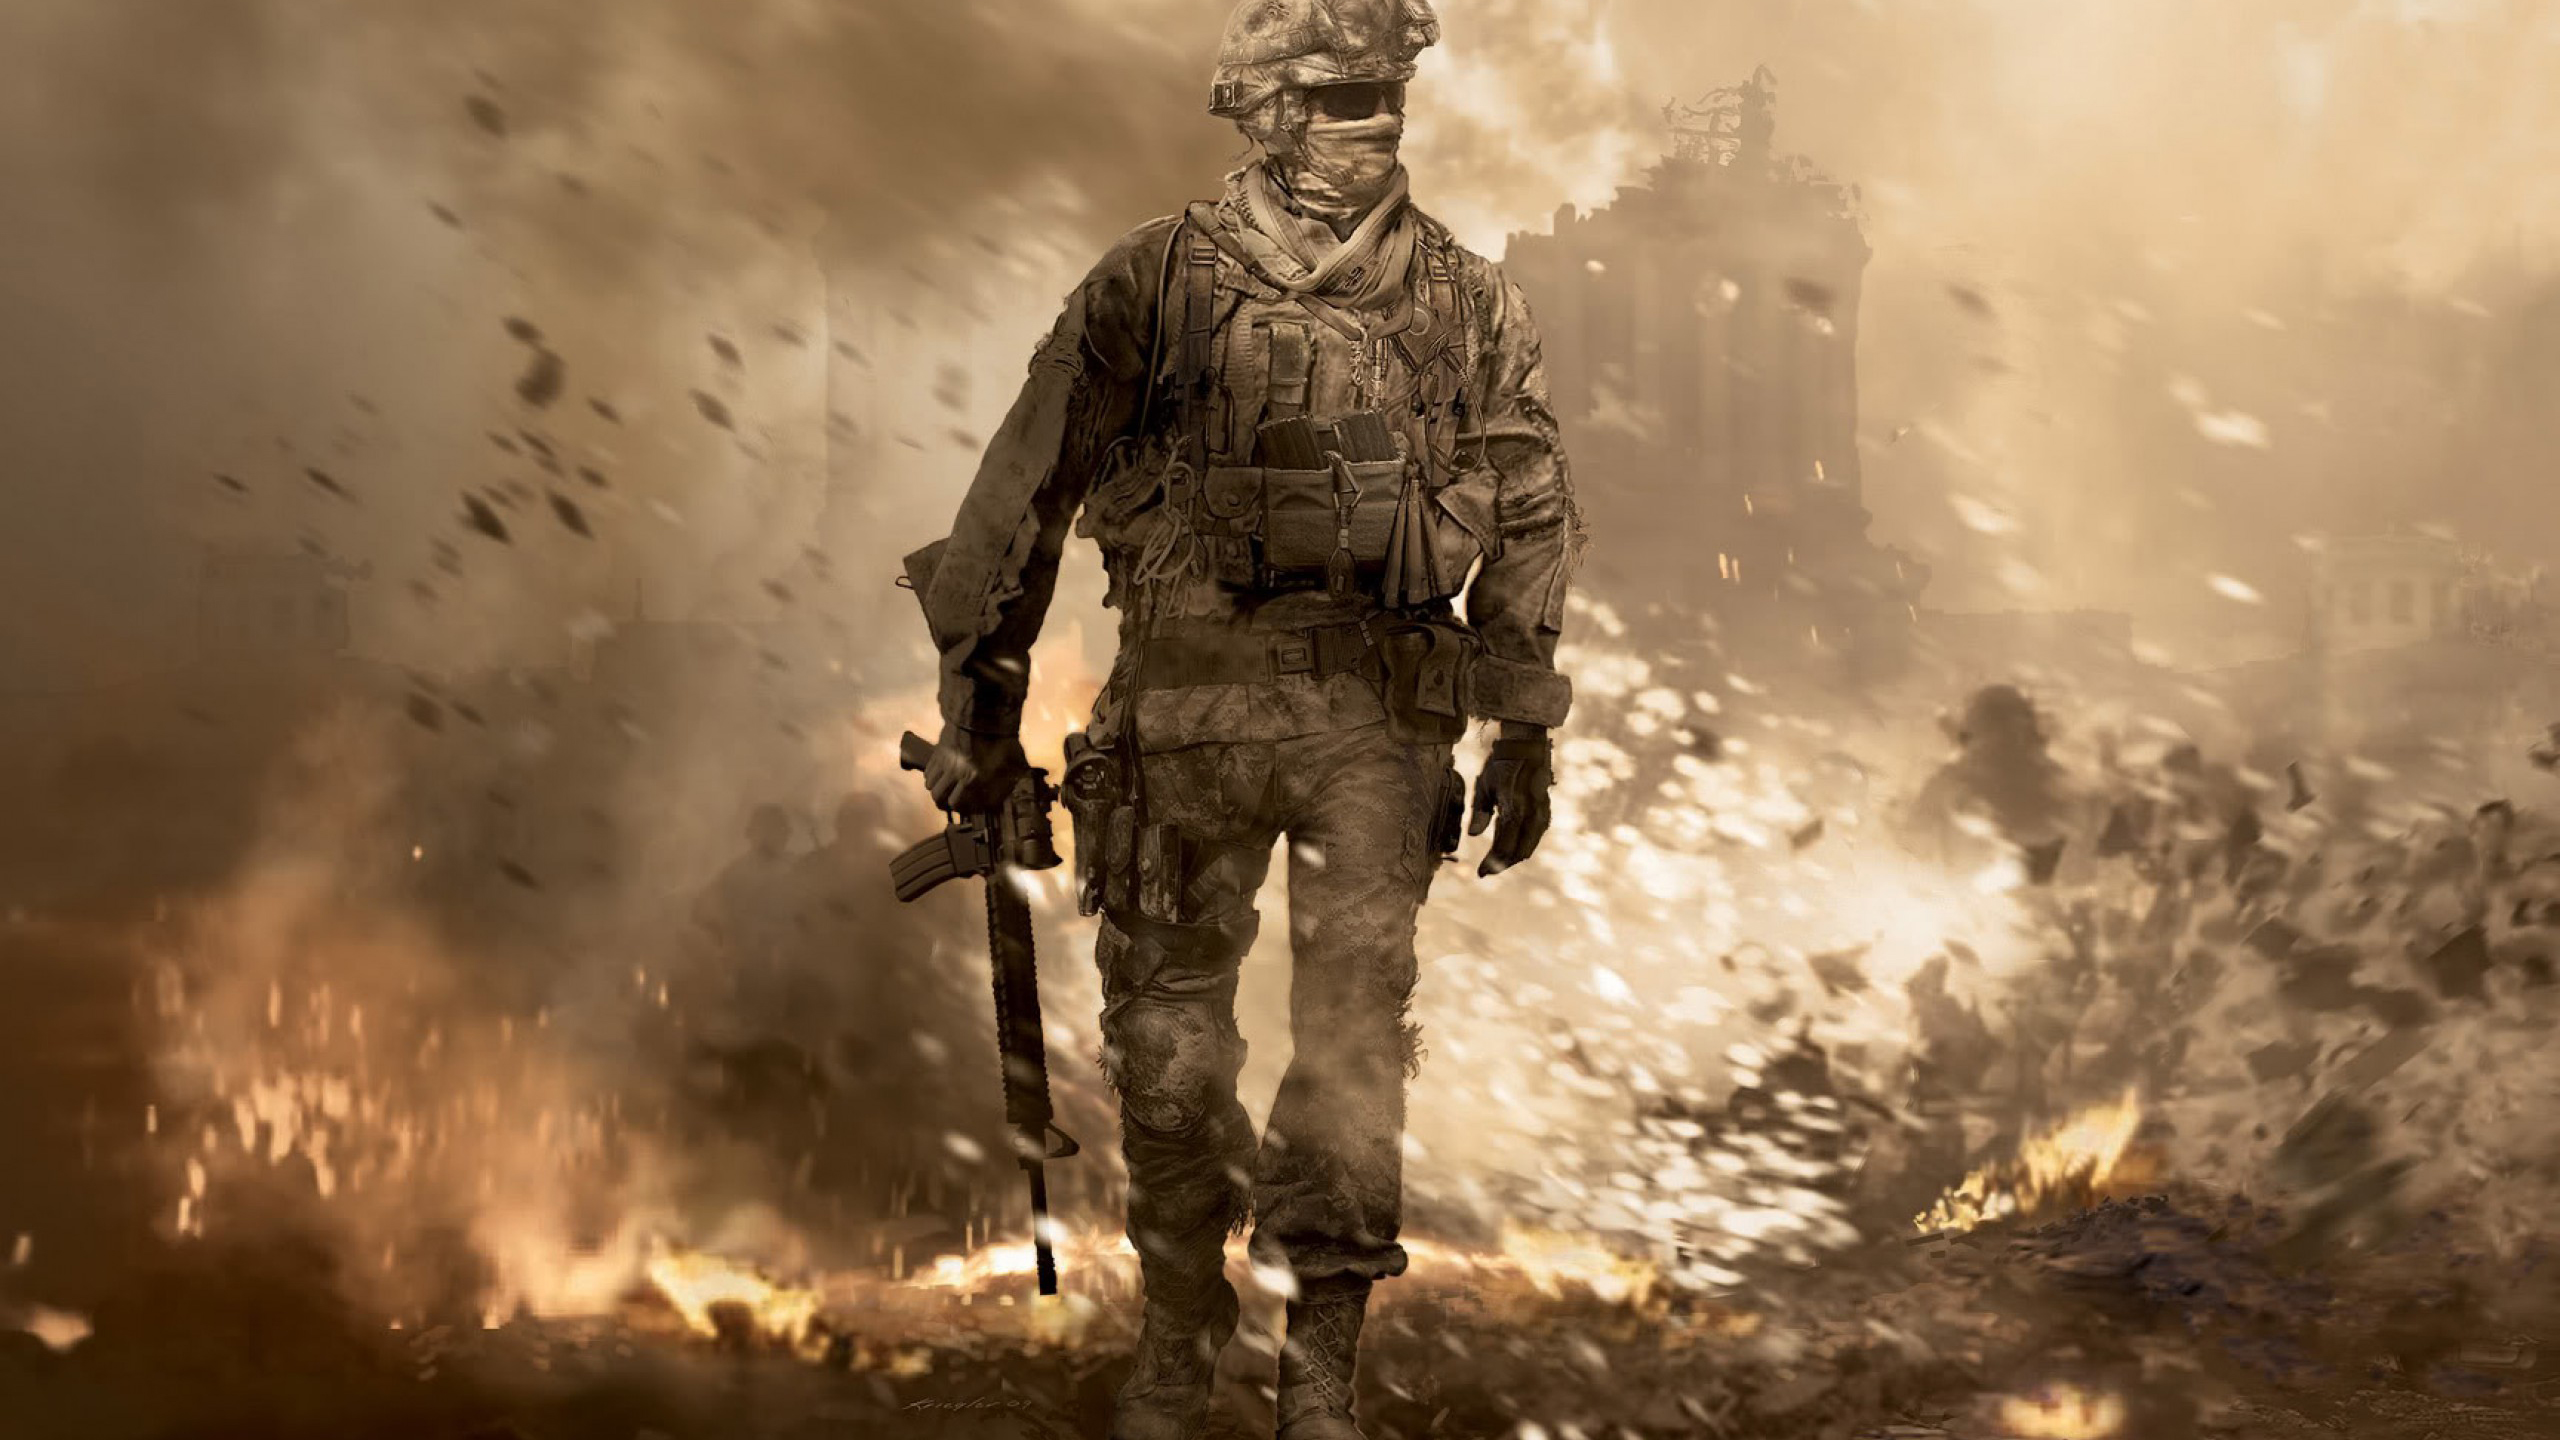 52 Cool Call of Duty Wallpapers HD 4K 5K for PC and Mobile  Download  free images for iPhone Android